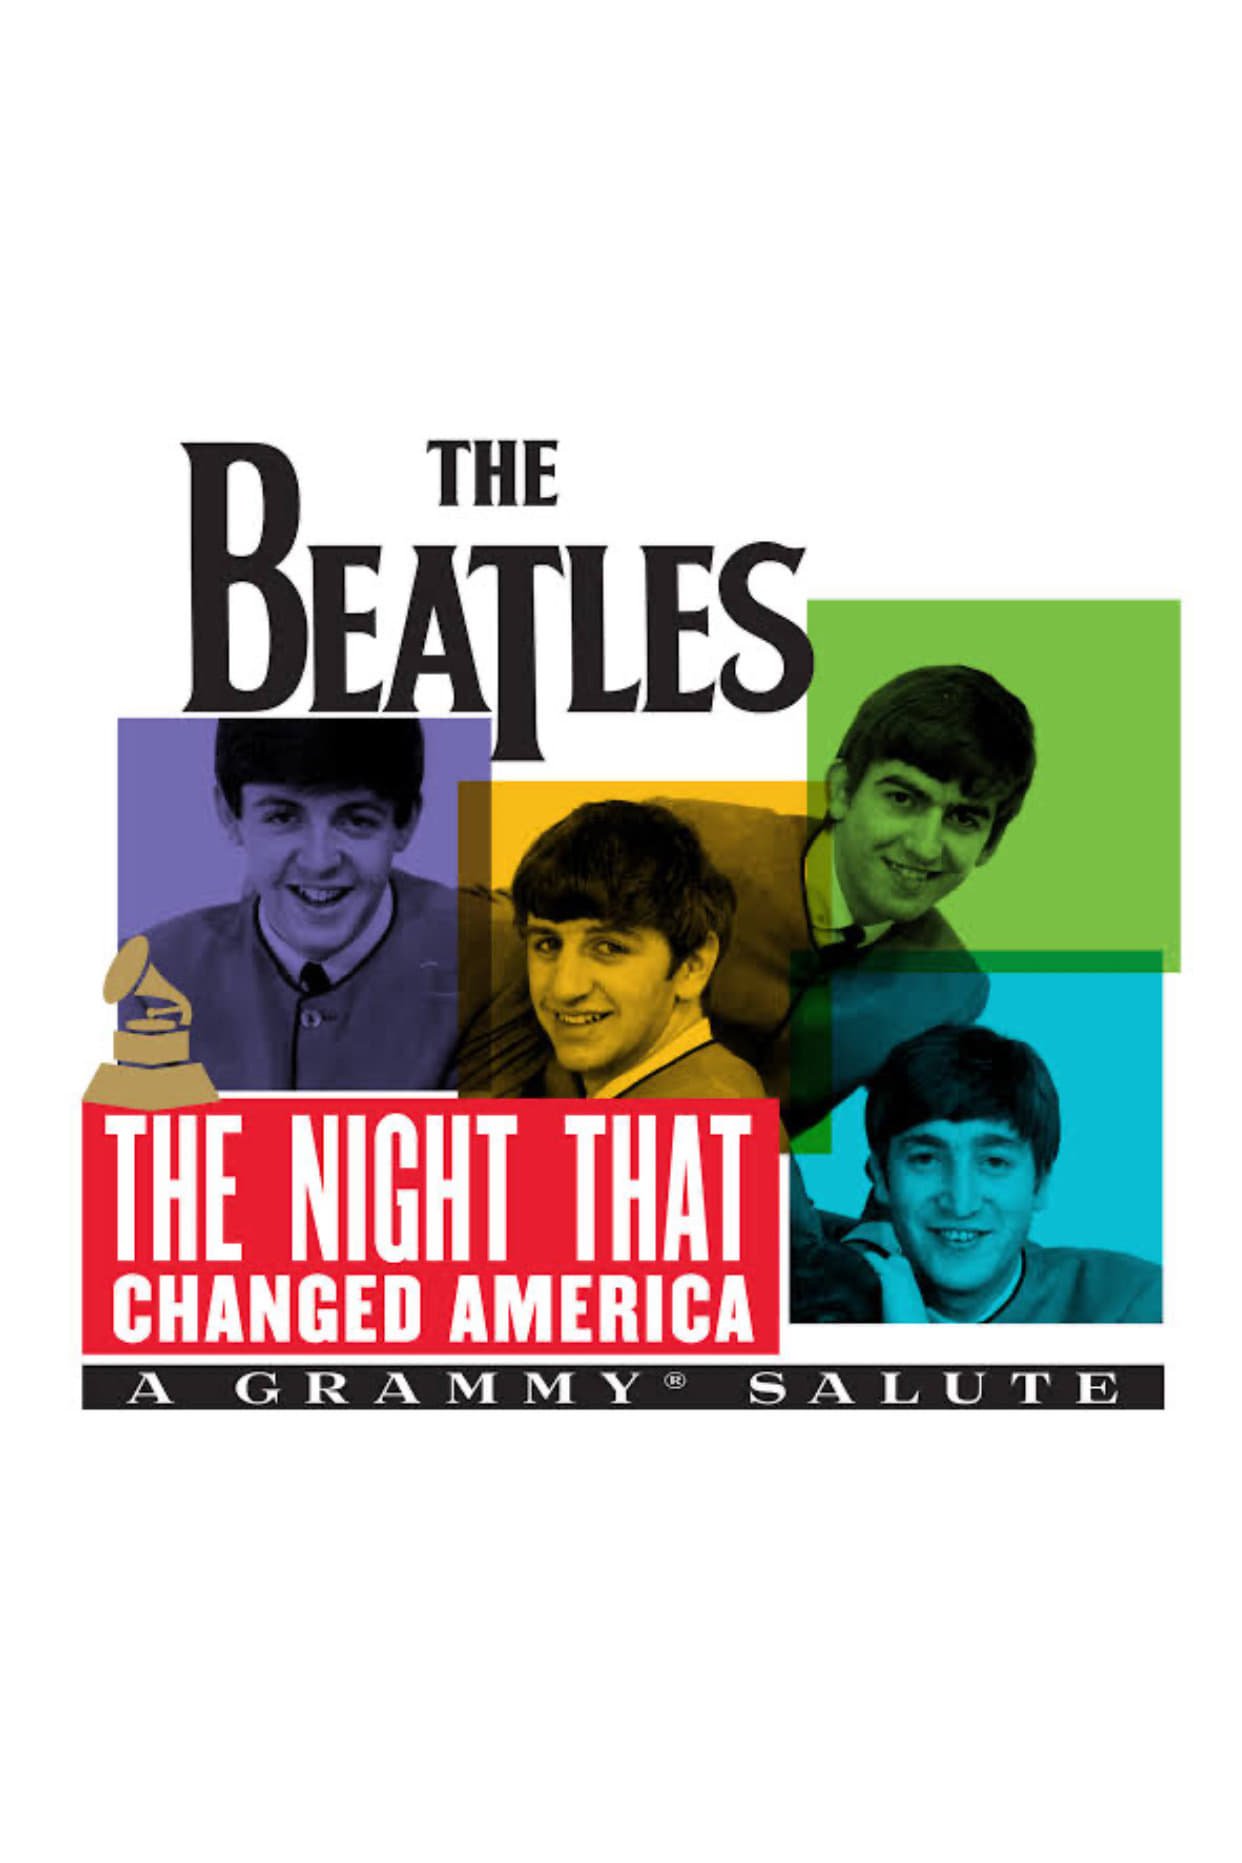 The Beatles The Night That Changed America - A Grammy Salute